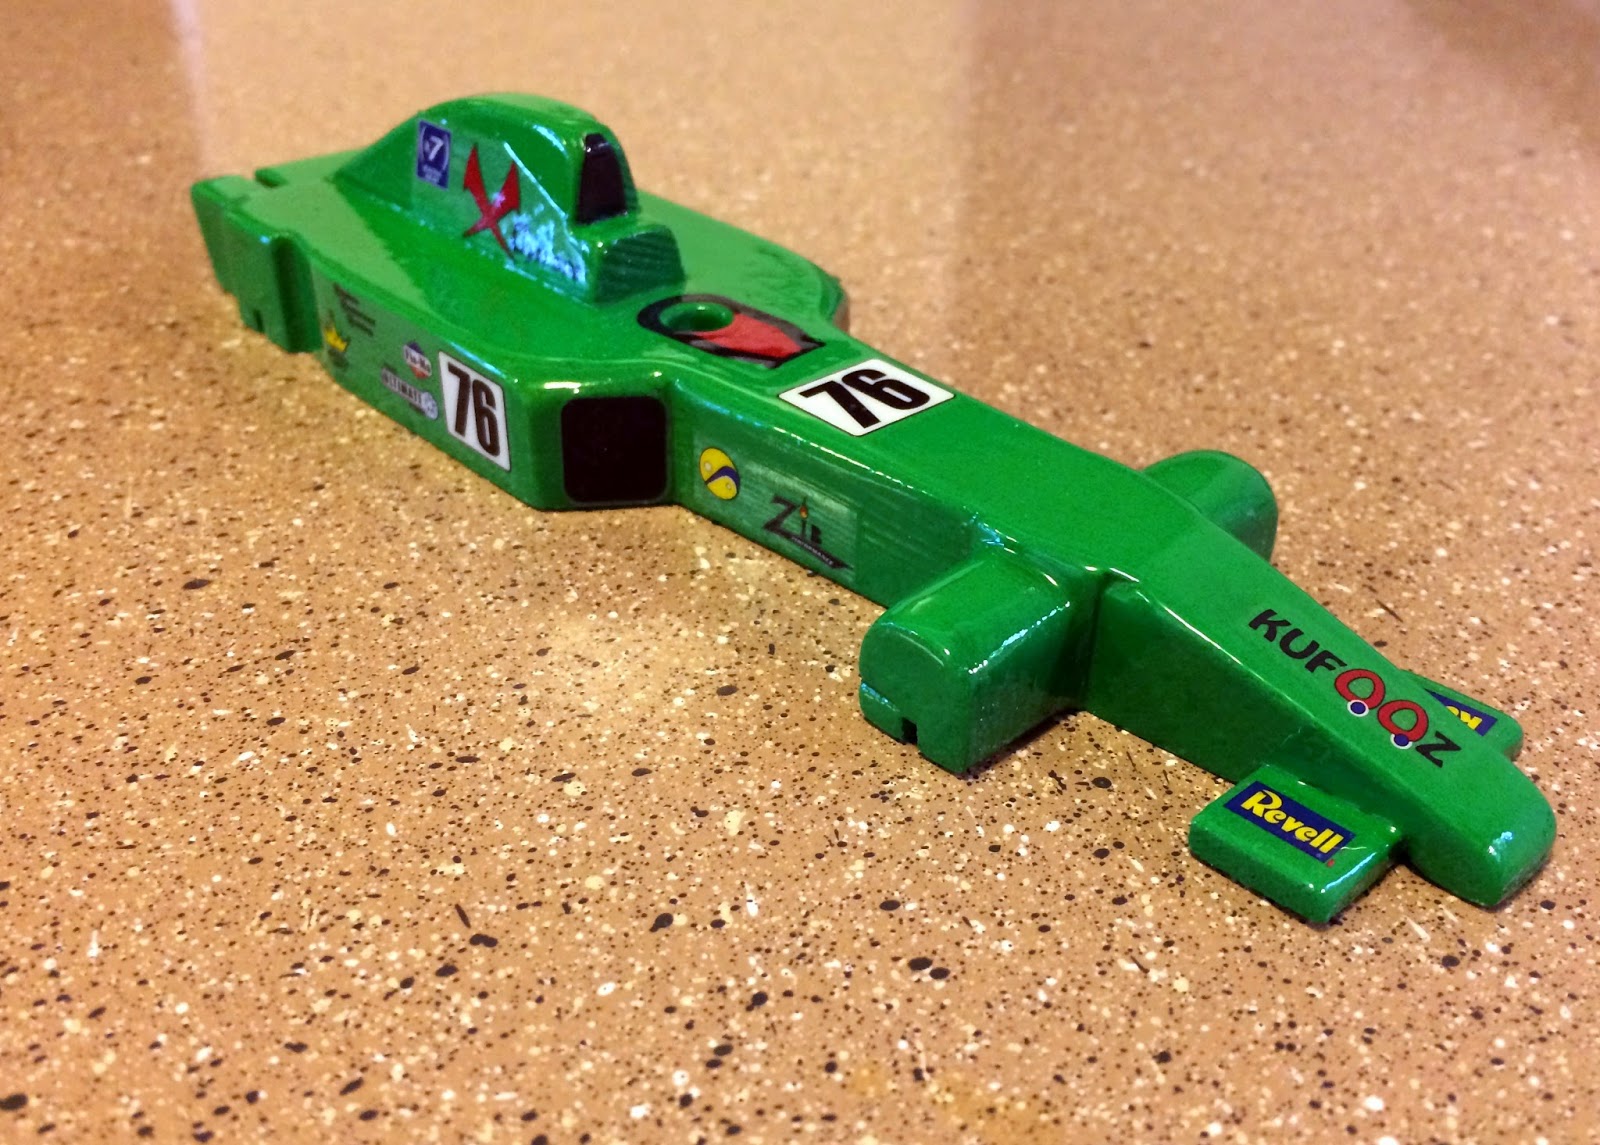 Was This Really a Sharp Idea?: Pinewood Derby